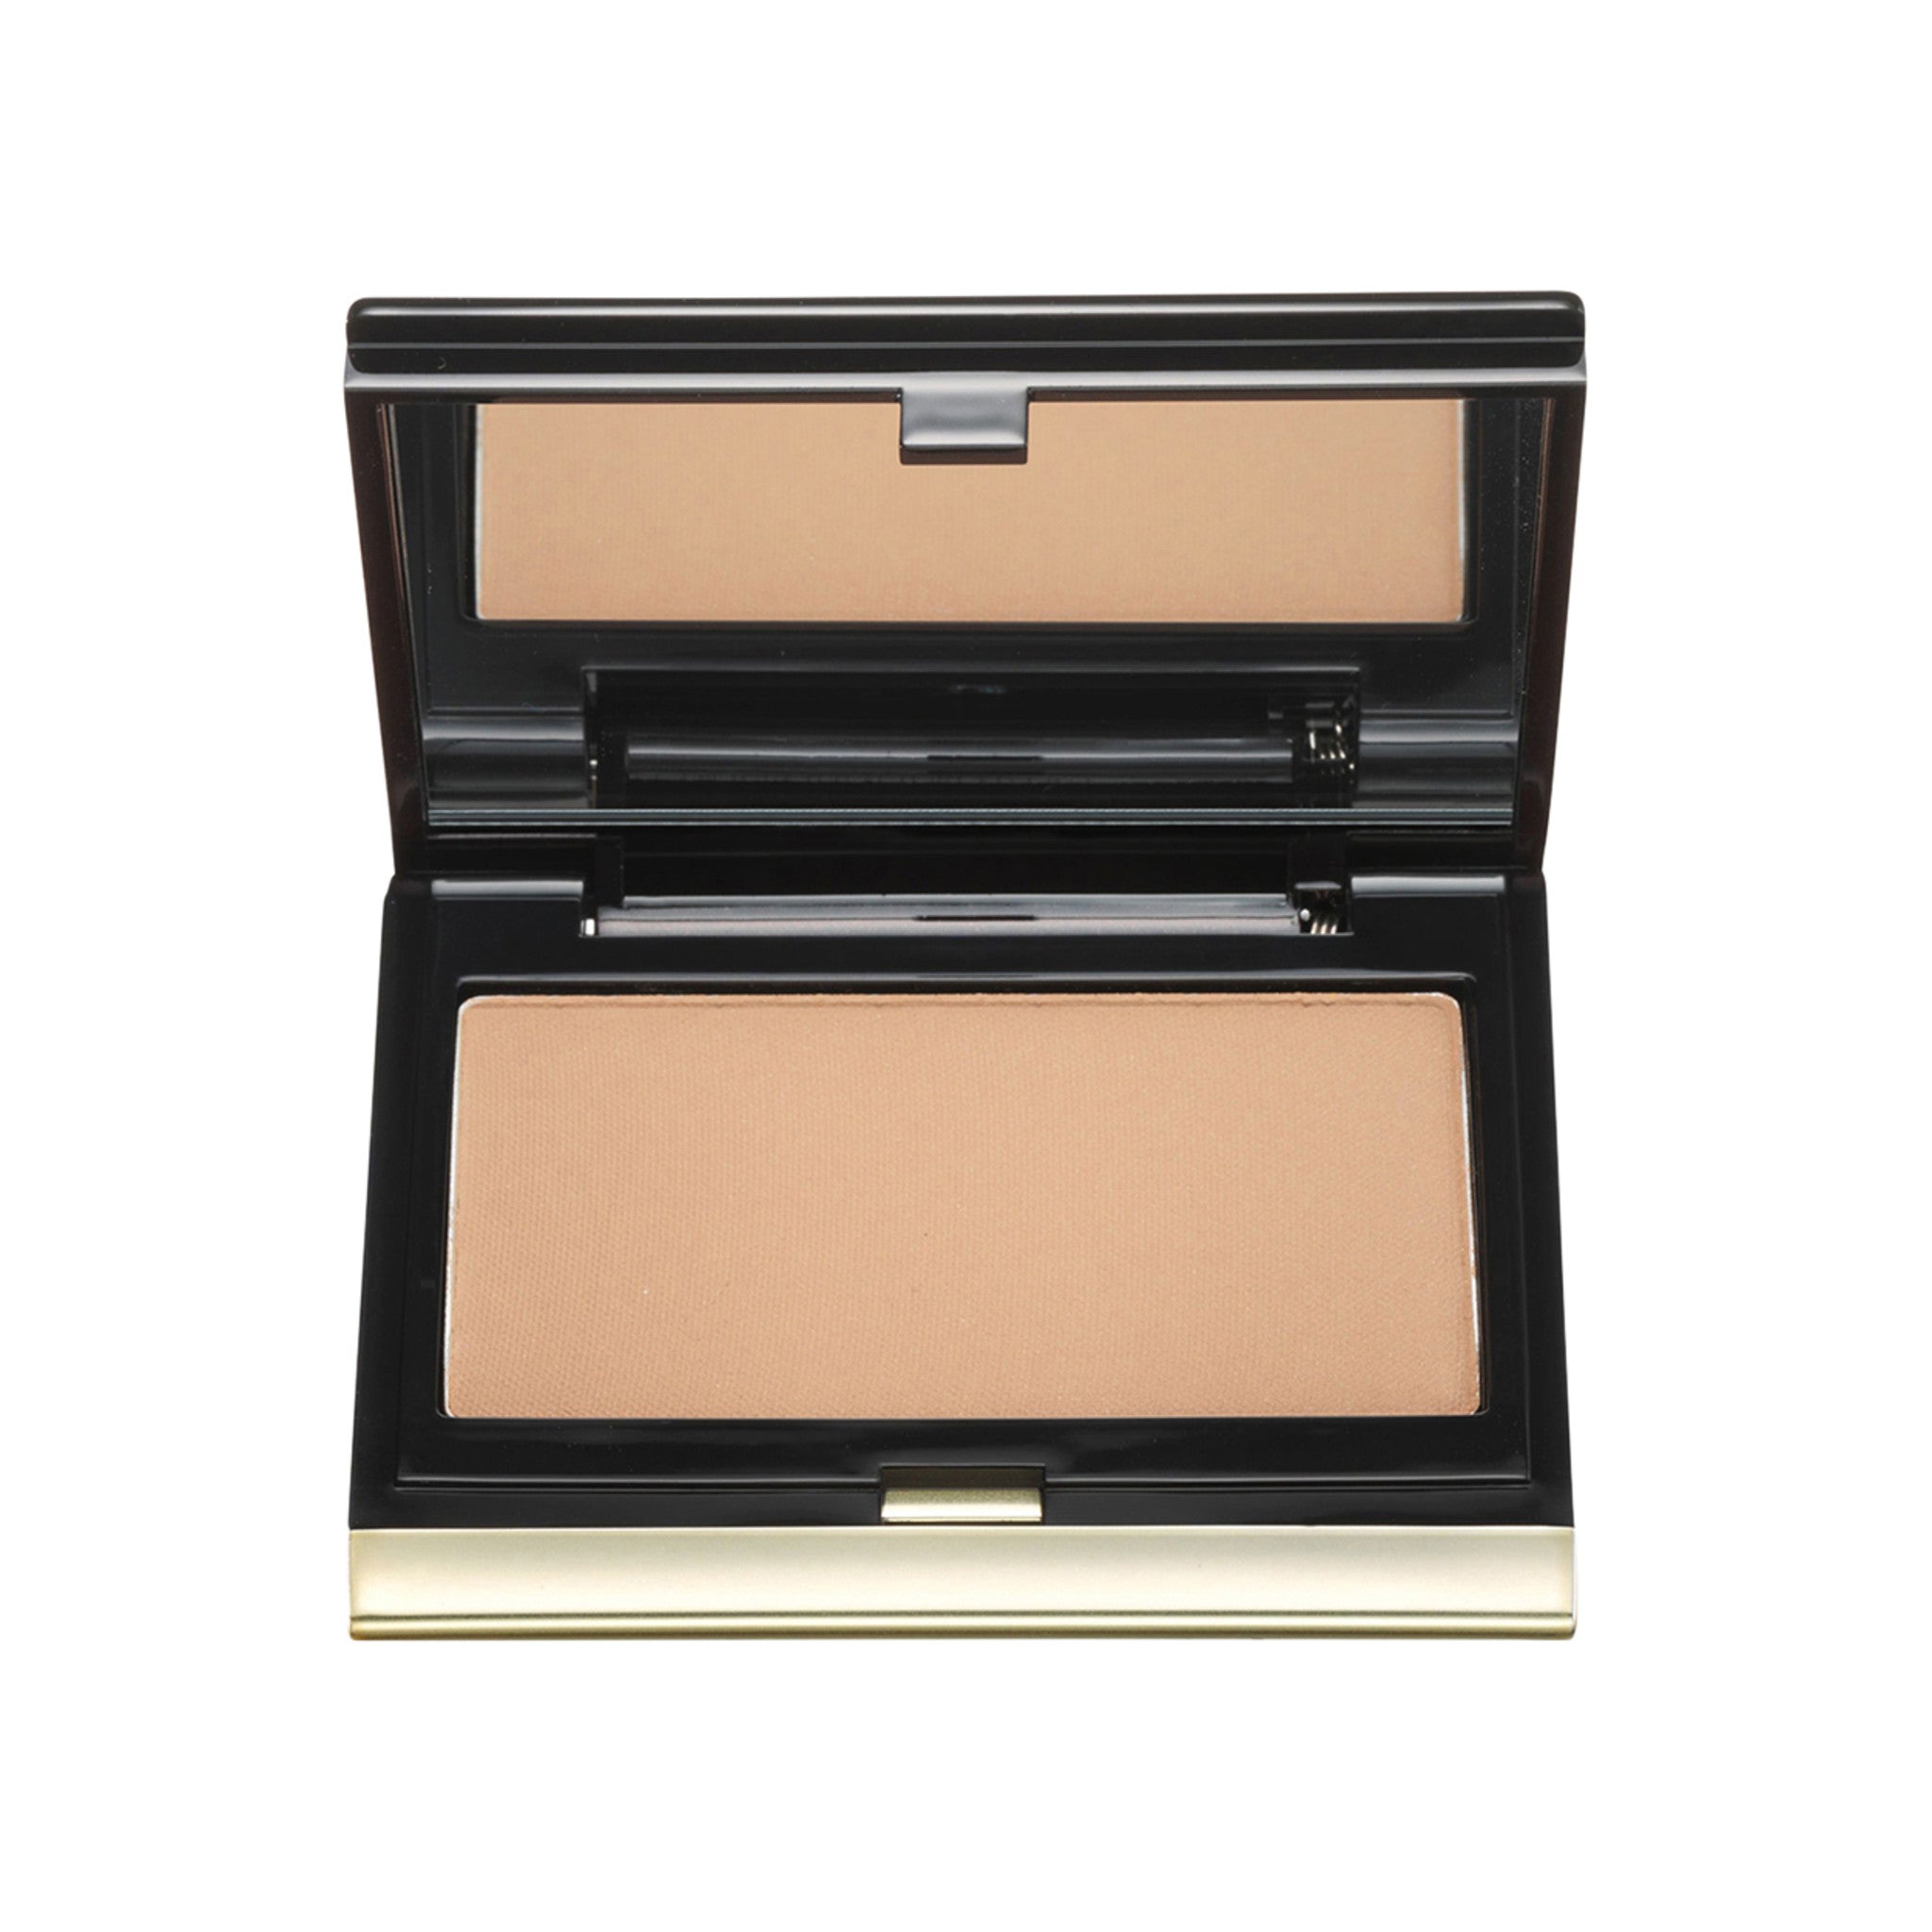 Kevyn Aucoin The Sculpting Contour Powder Color/Shade variant: Medium main image. This product is for medium complexions